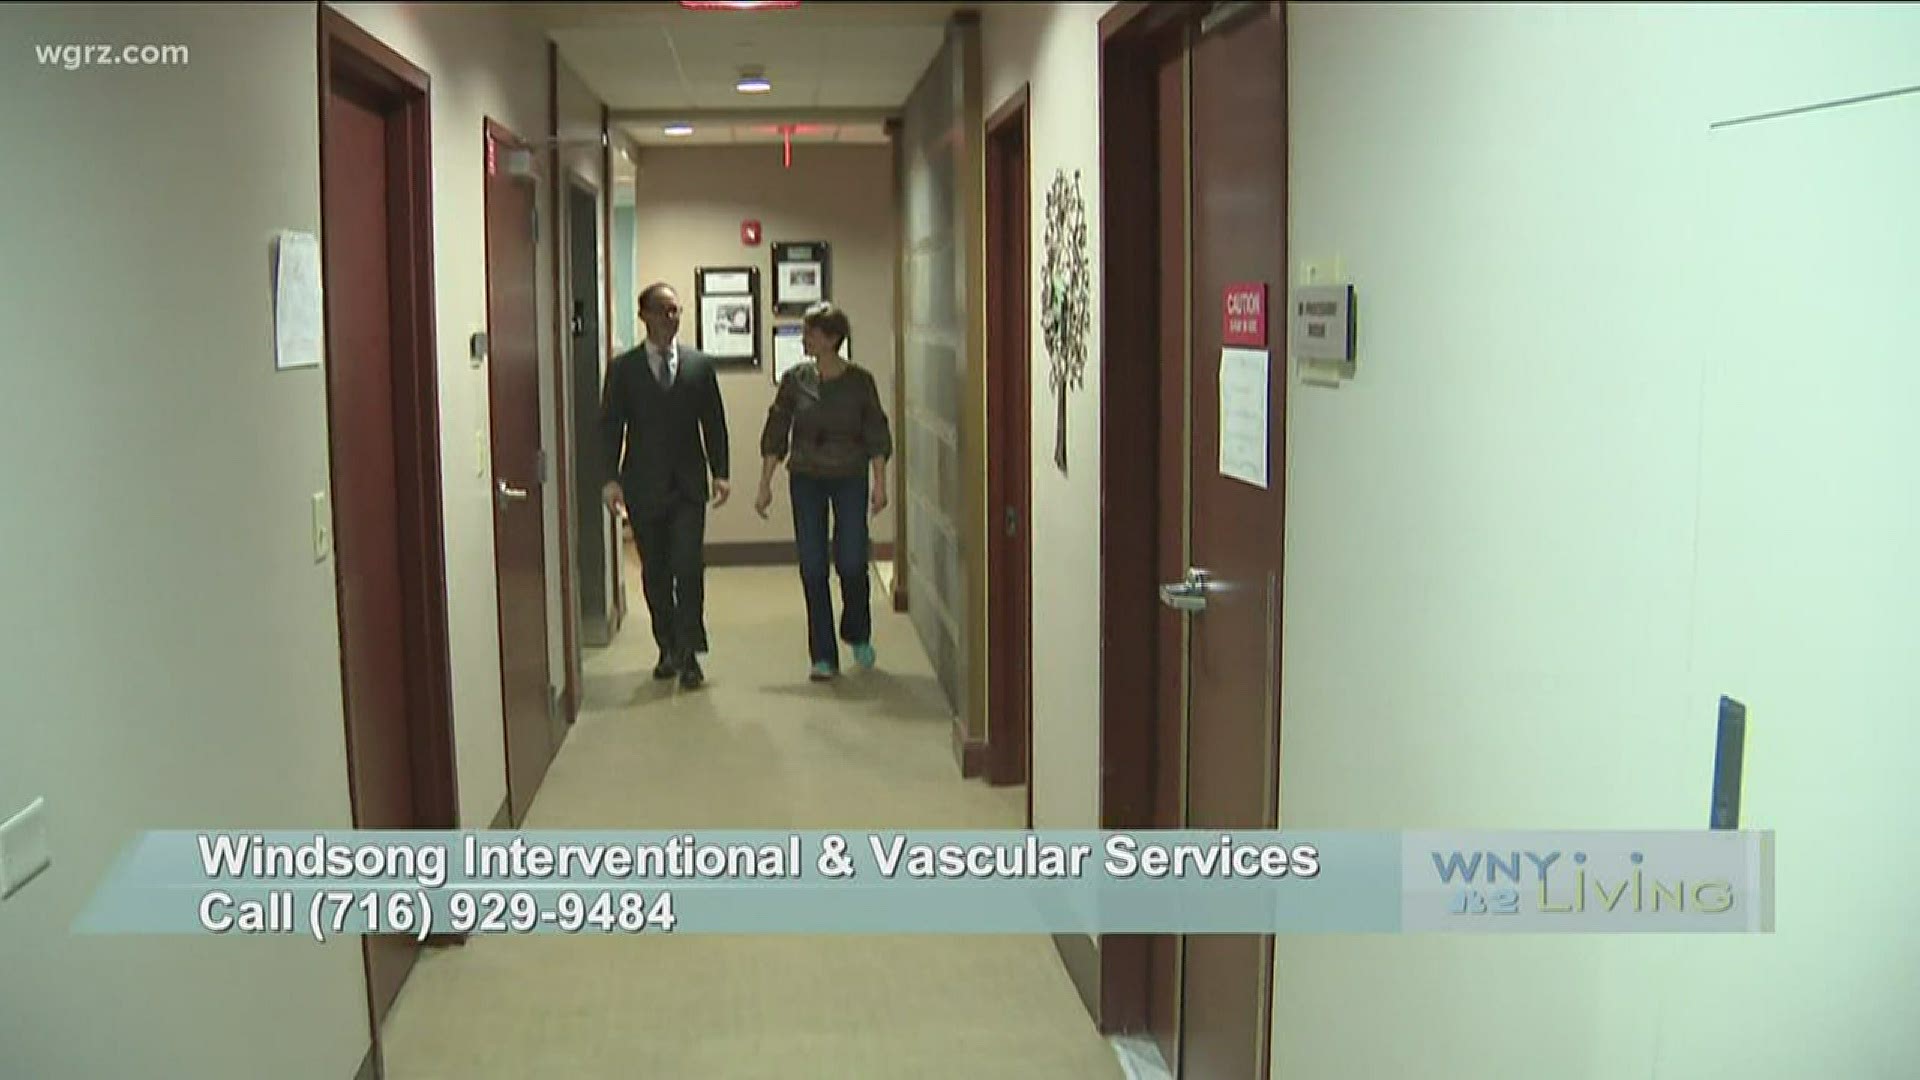 WNY Living - July 25 - Windsong Interventional & Vascular Services (THIS VIDEO IS SPONSORED BY WINDSONG INTERVENTIONAL & VASCULAR SERVICES)